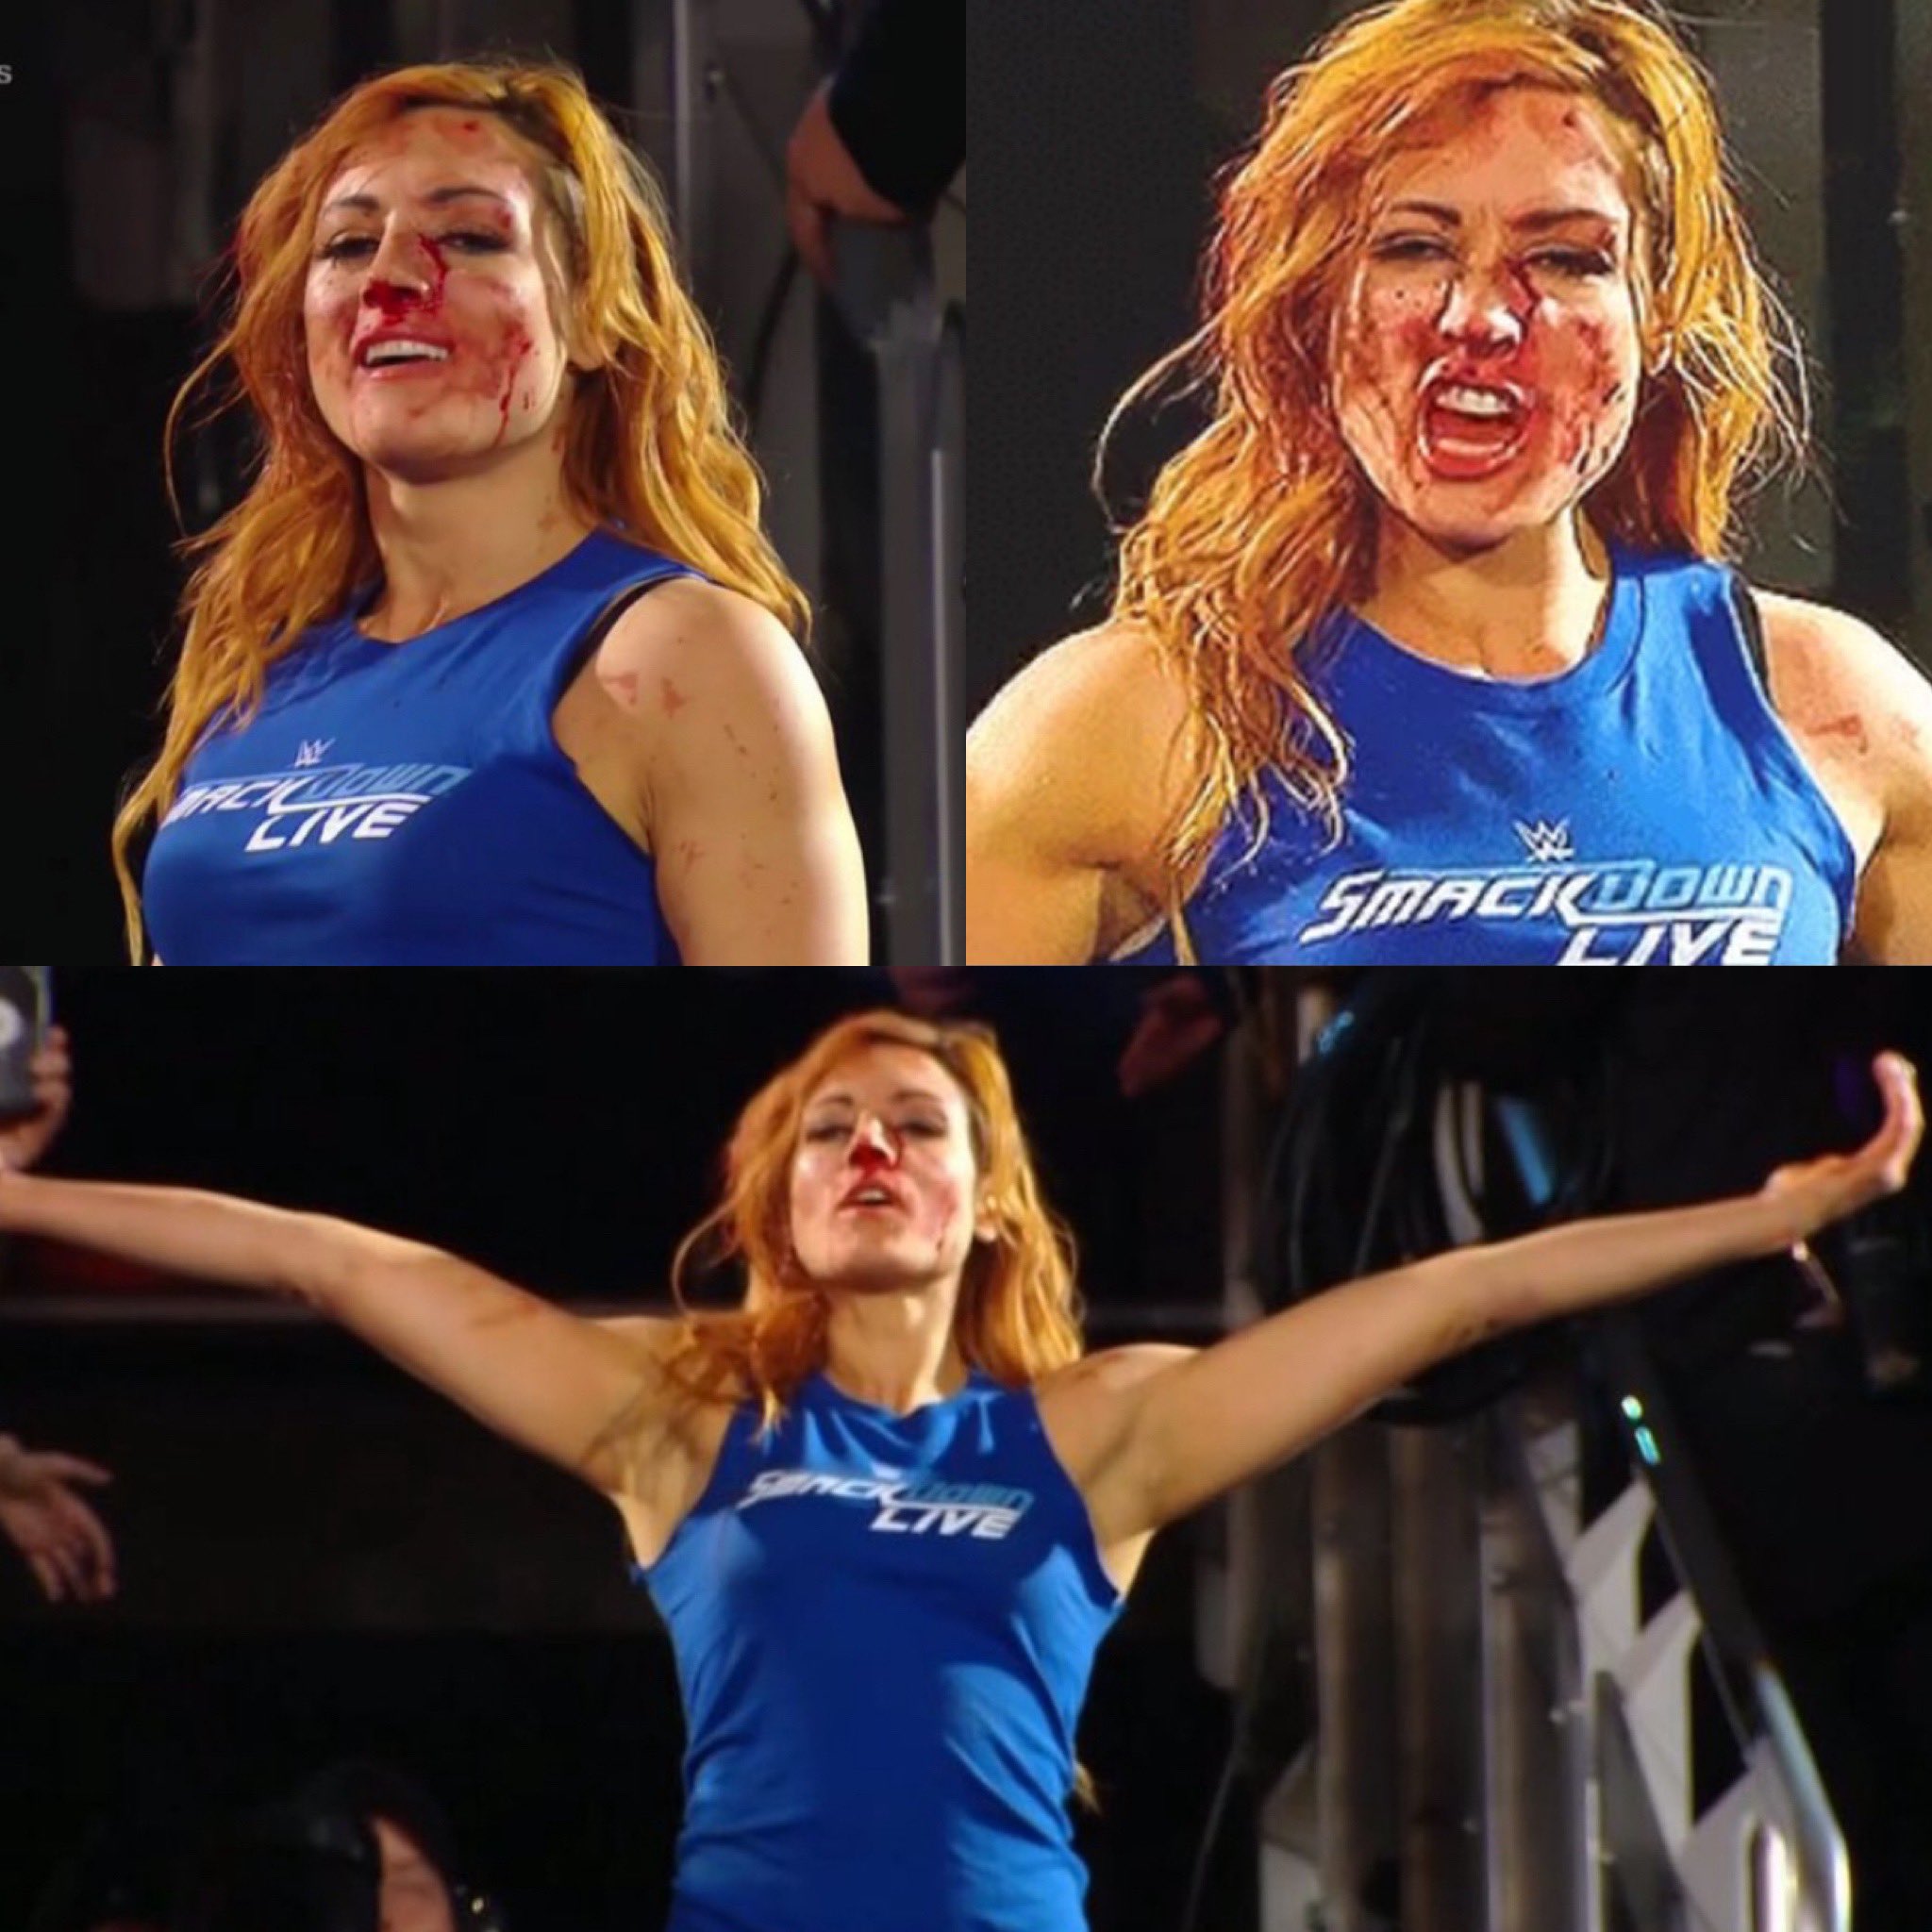 Becky at #wwepeoria ❤️‍🔥 - - 📸: currentlycoyne on twitter